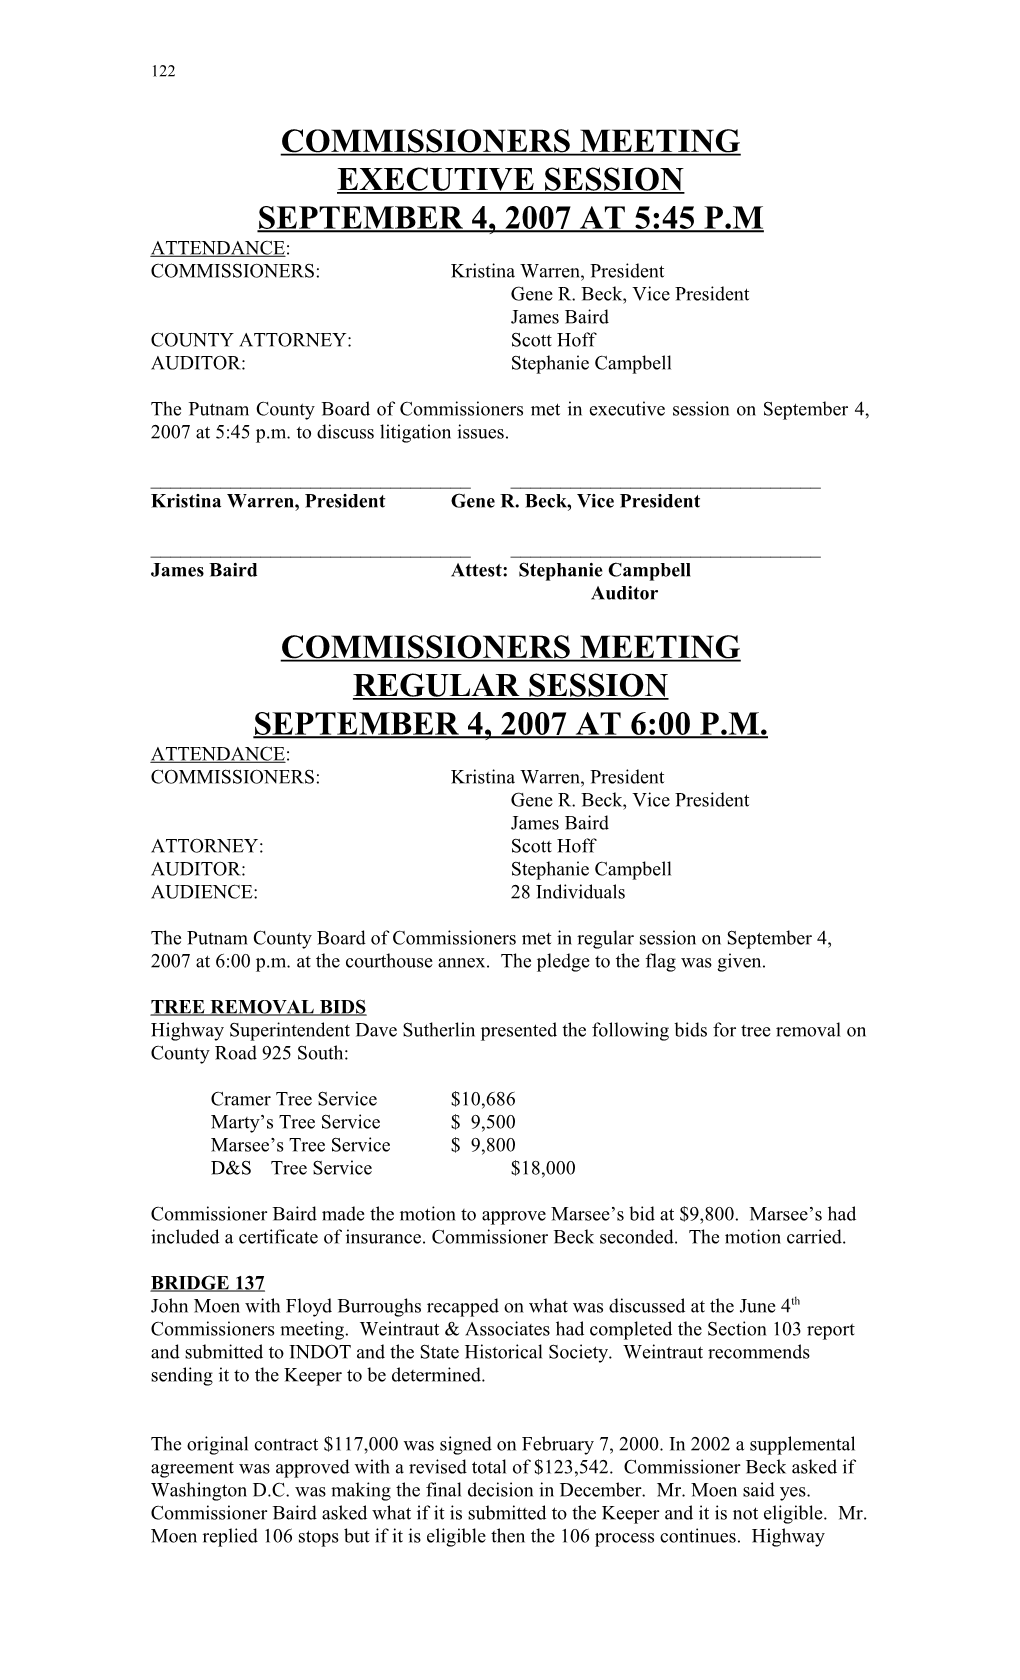 Commissioners Meeting s1